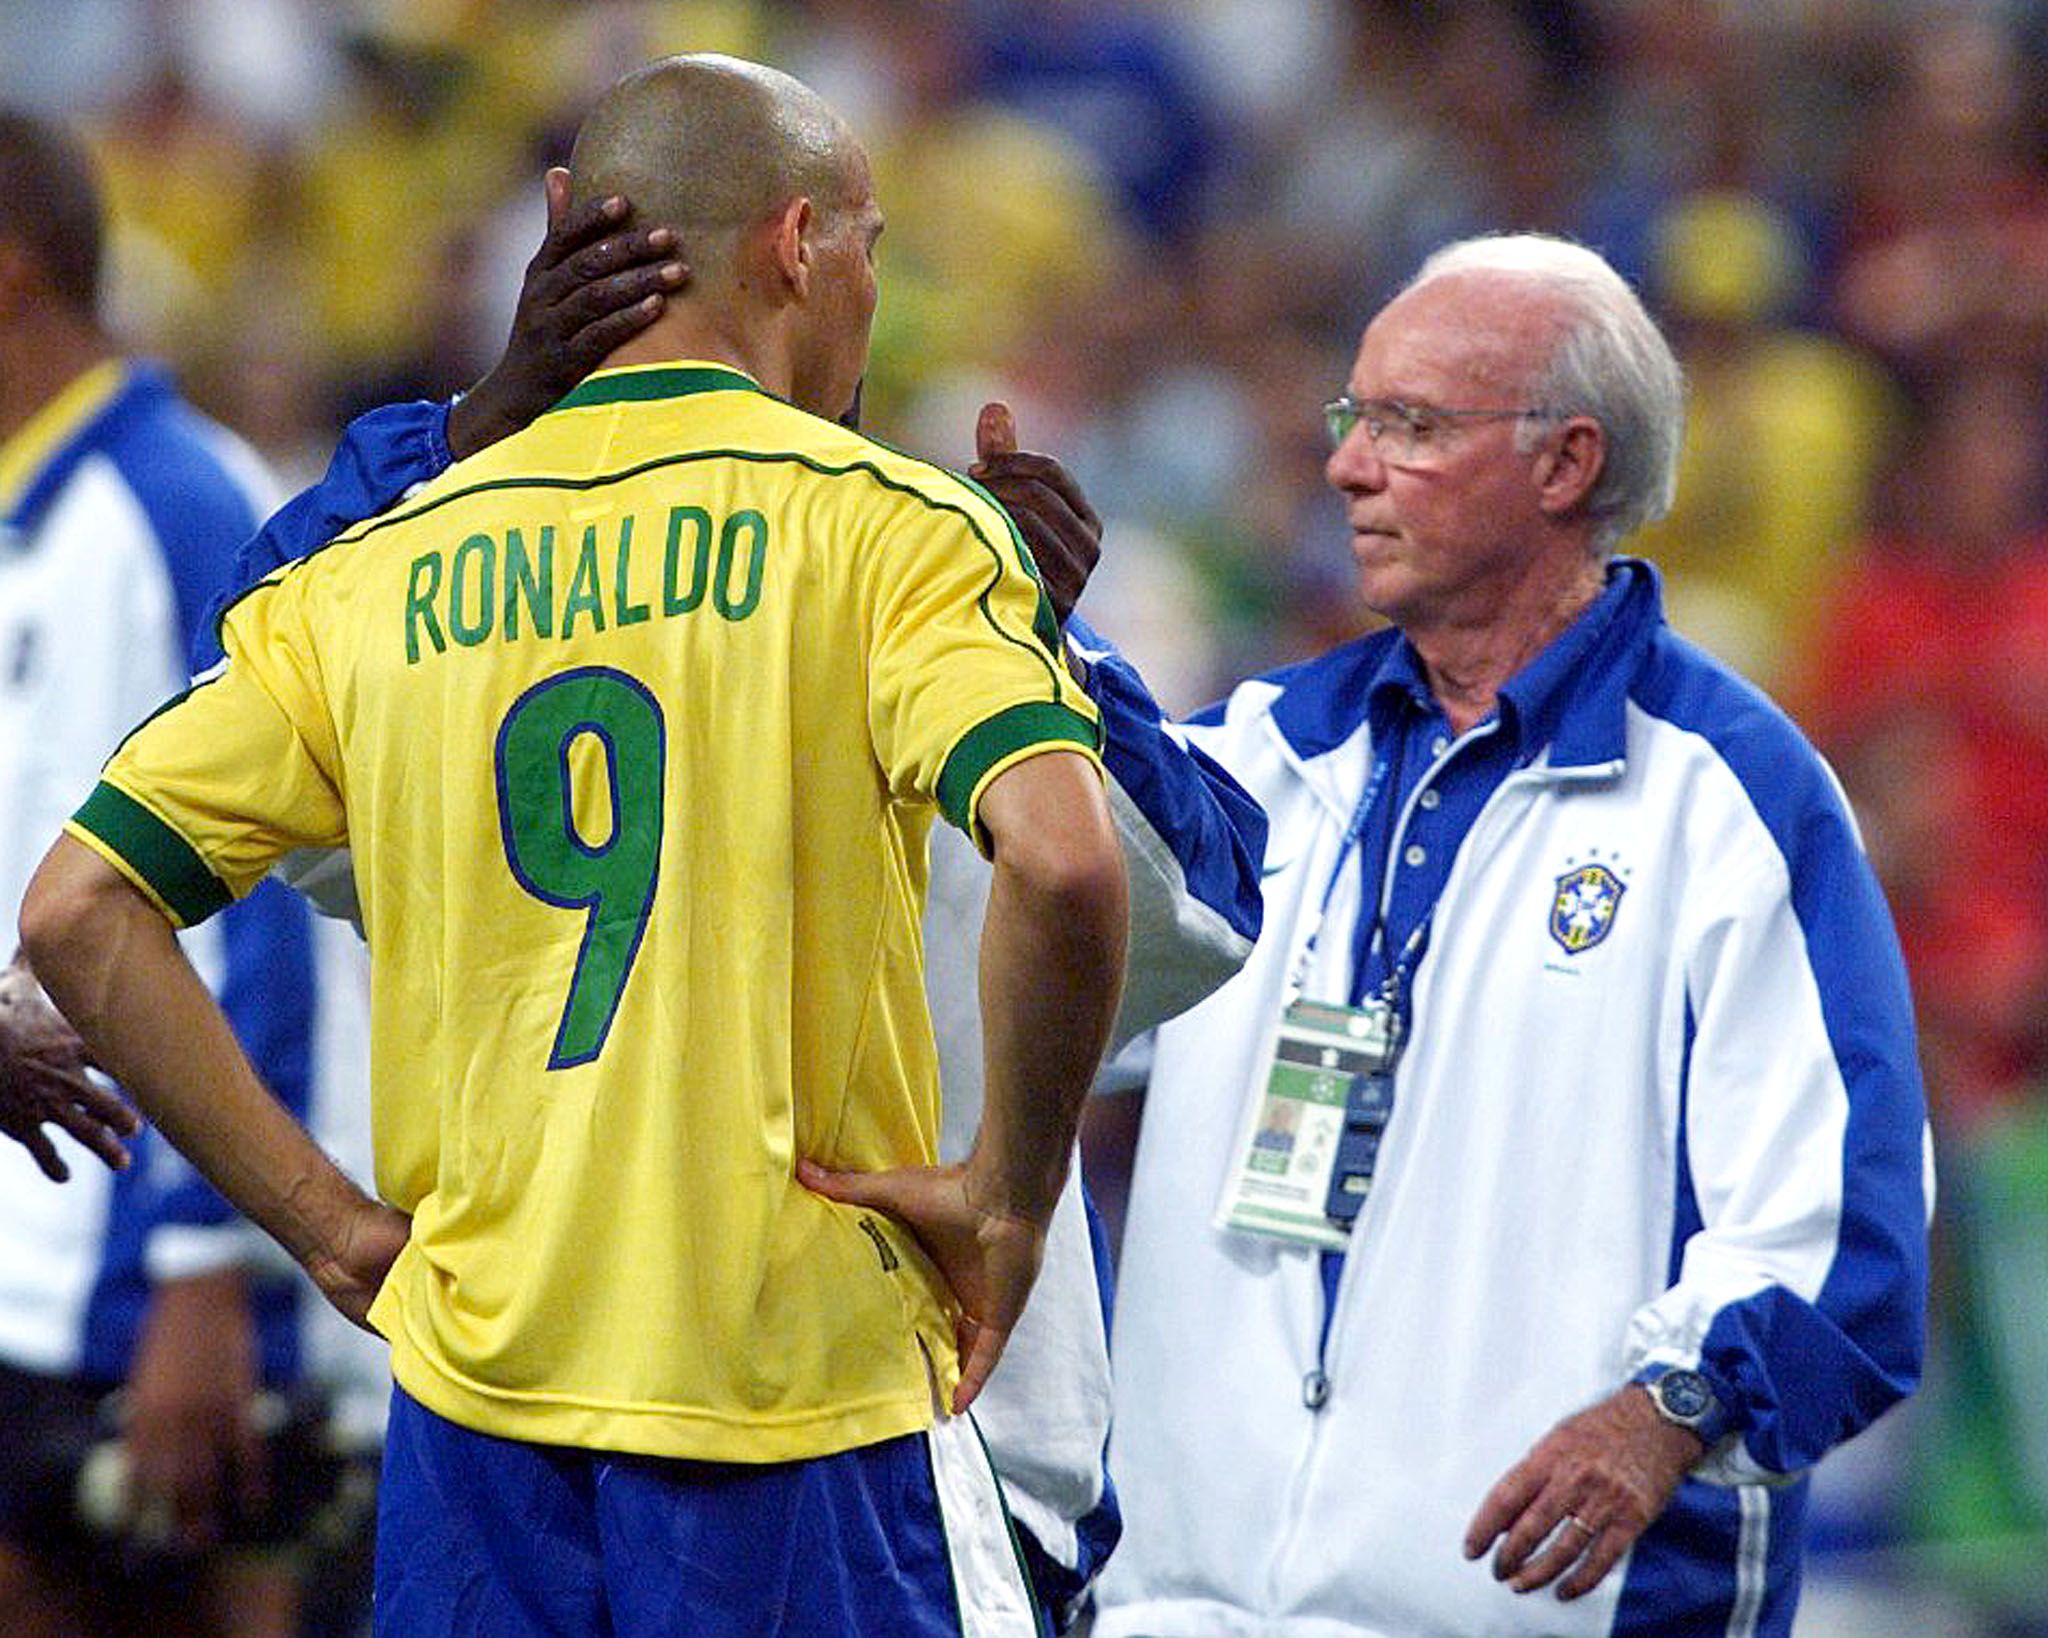 Ronaldo after Brazil lost the 1998 World Cup final